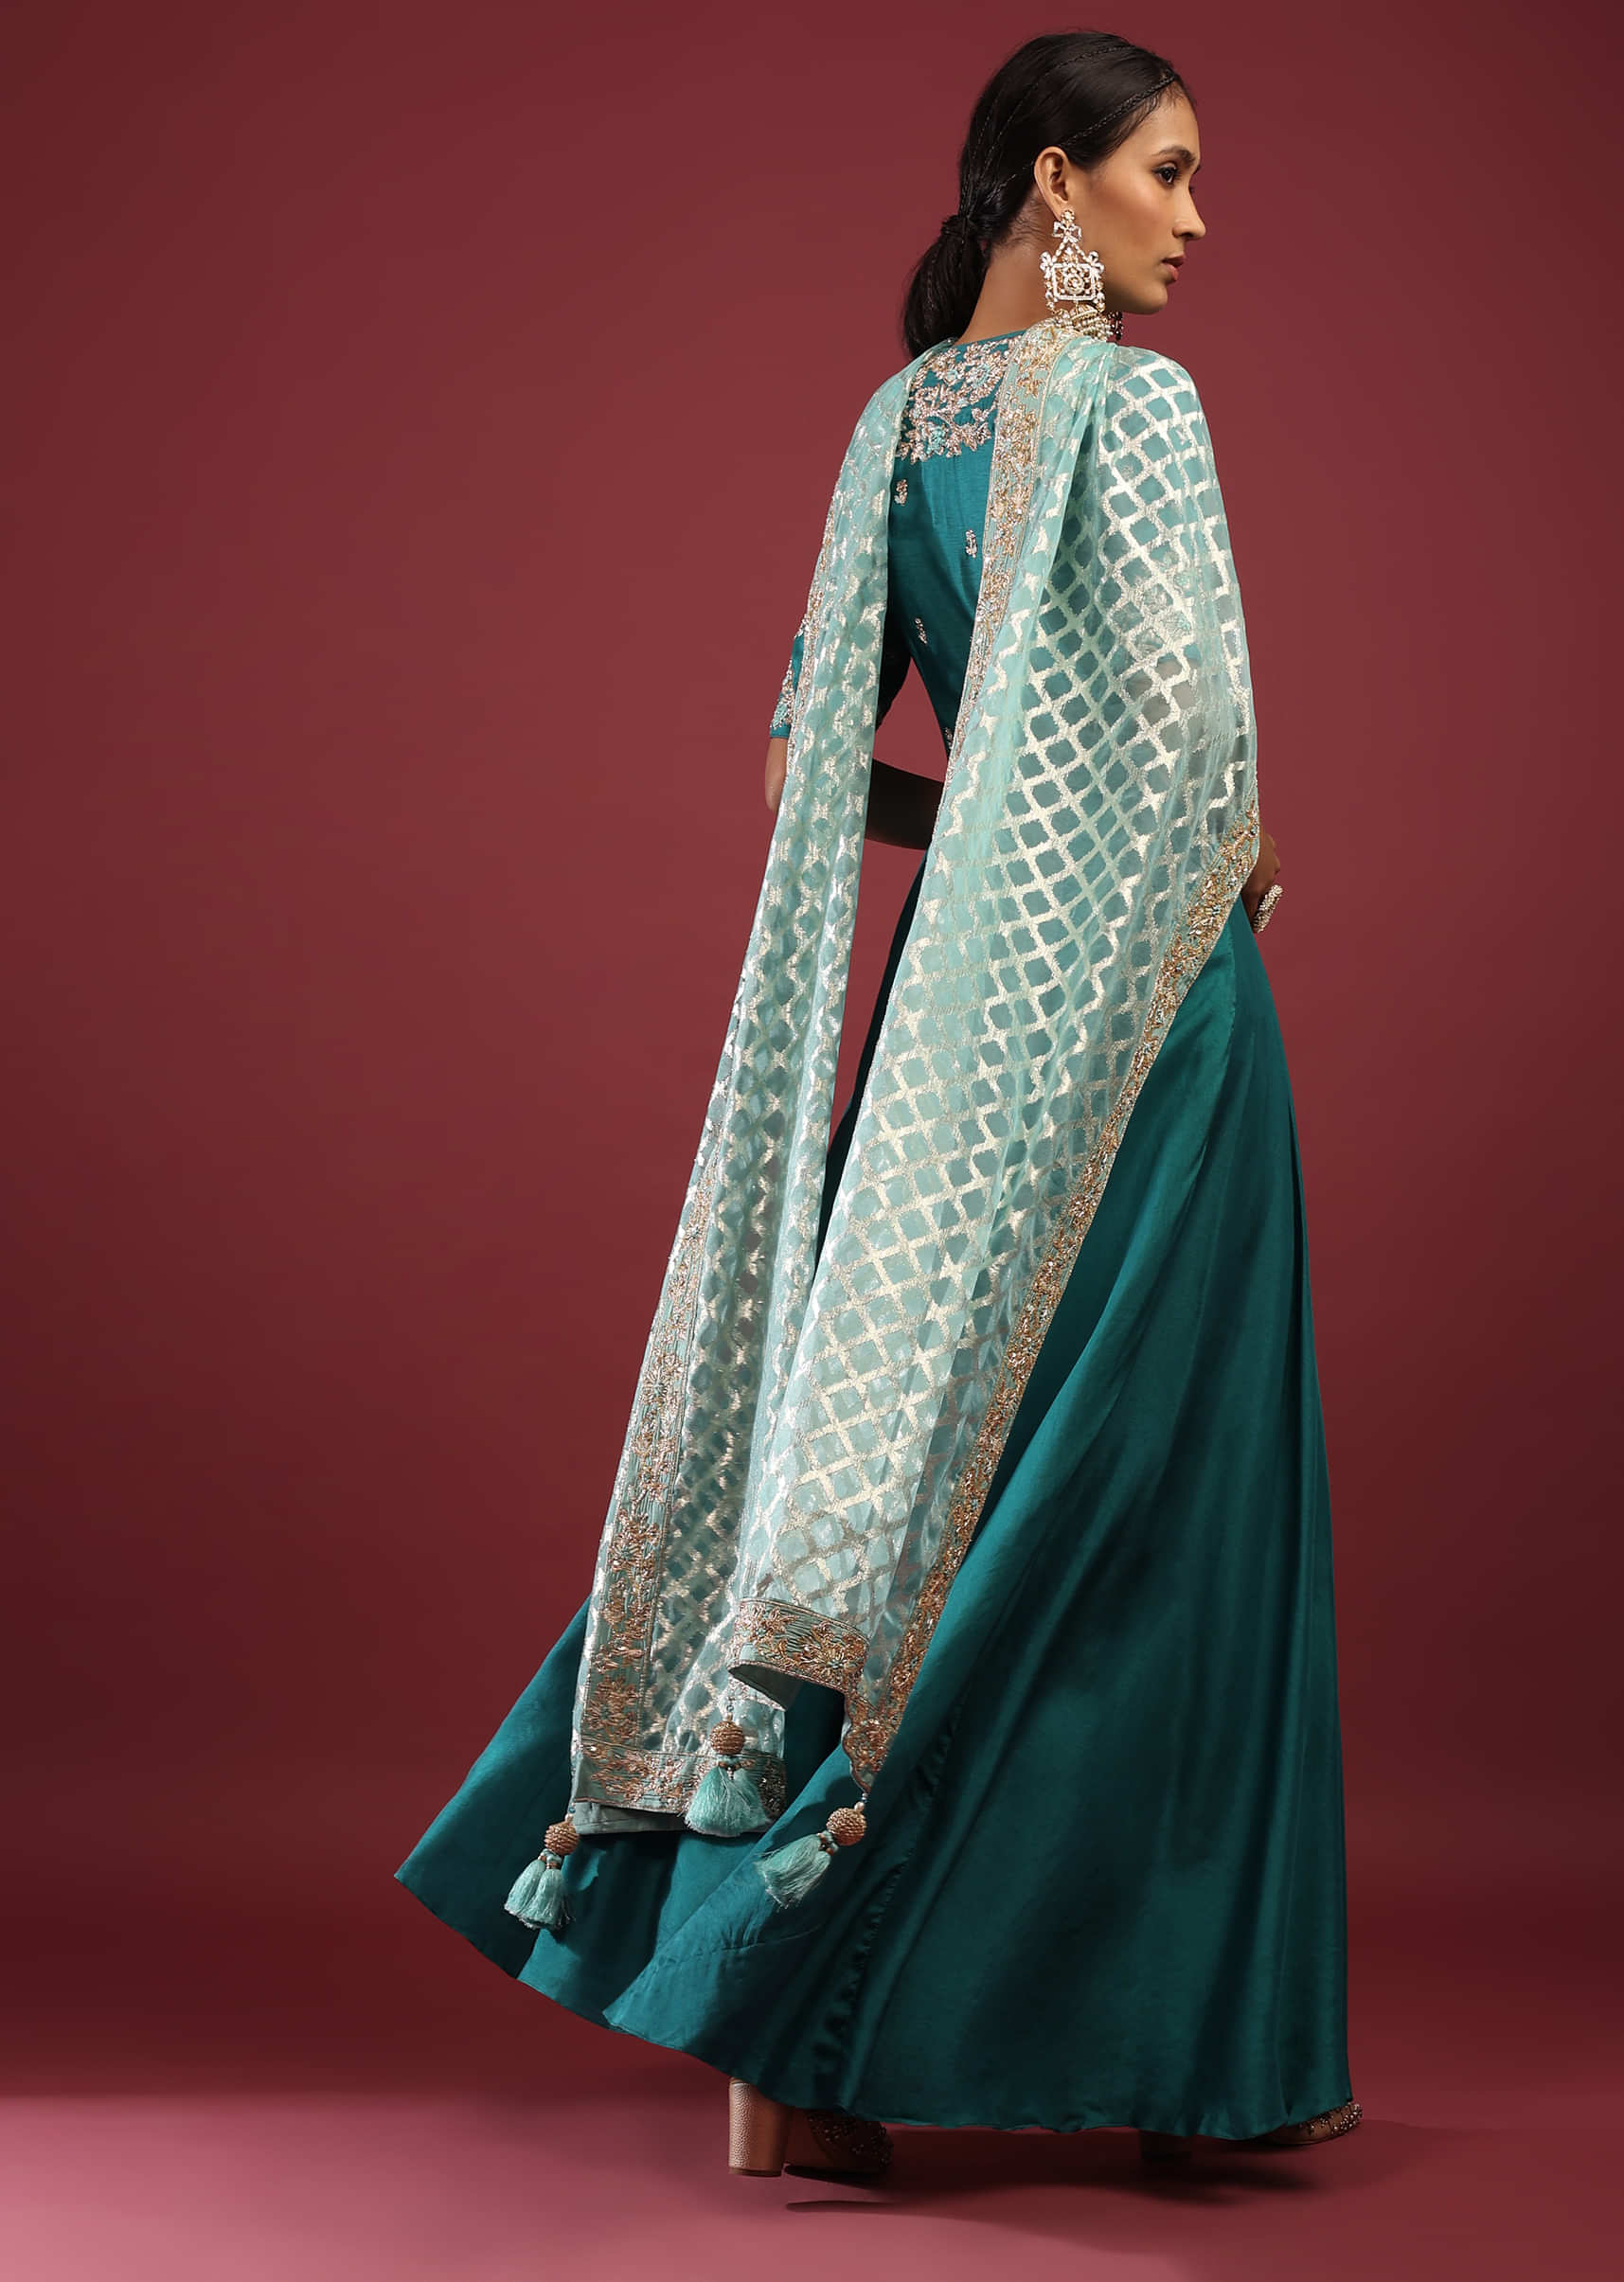 Teal Blue High Low Anarkali Suit With A Front Slit, Zardosi Floral Embroidery And Mint Lurex Dupatta